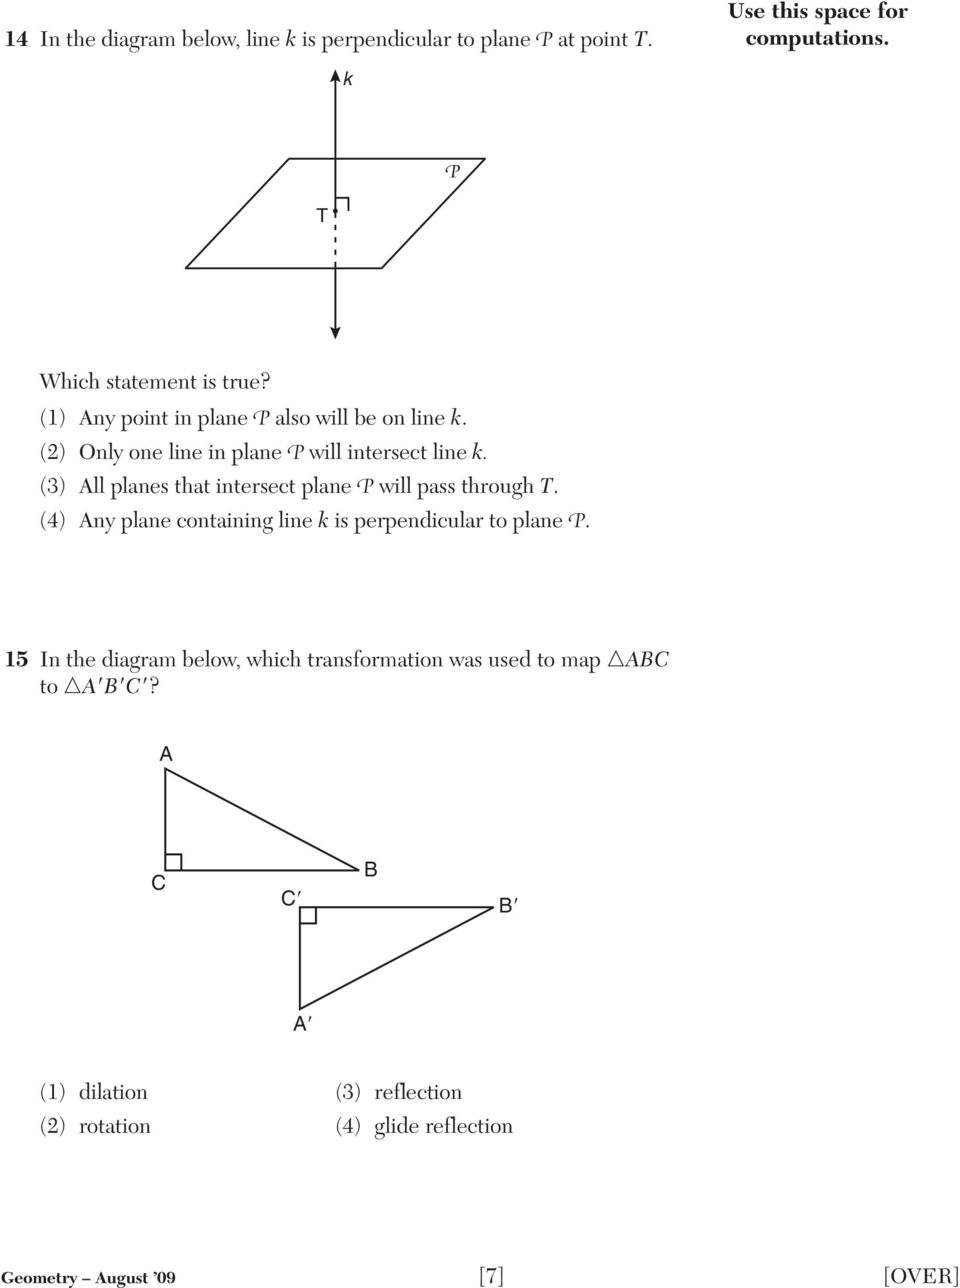 (3) All planes that intersect plane P will pass through T. (4) Any plane containing line k is perpendicular to plane P.